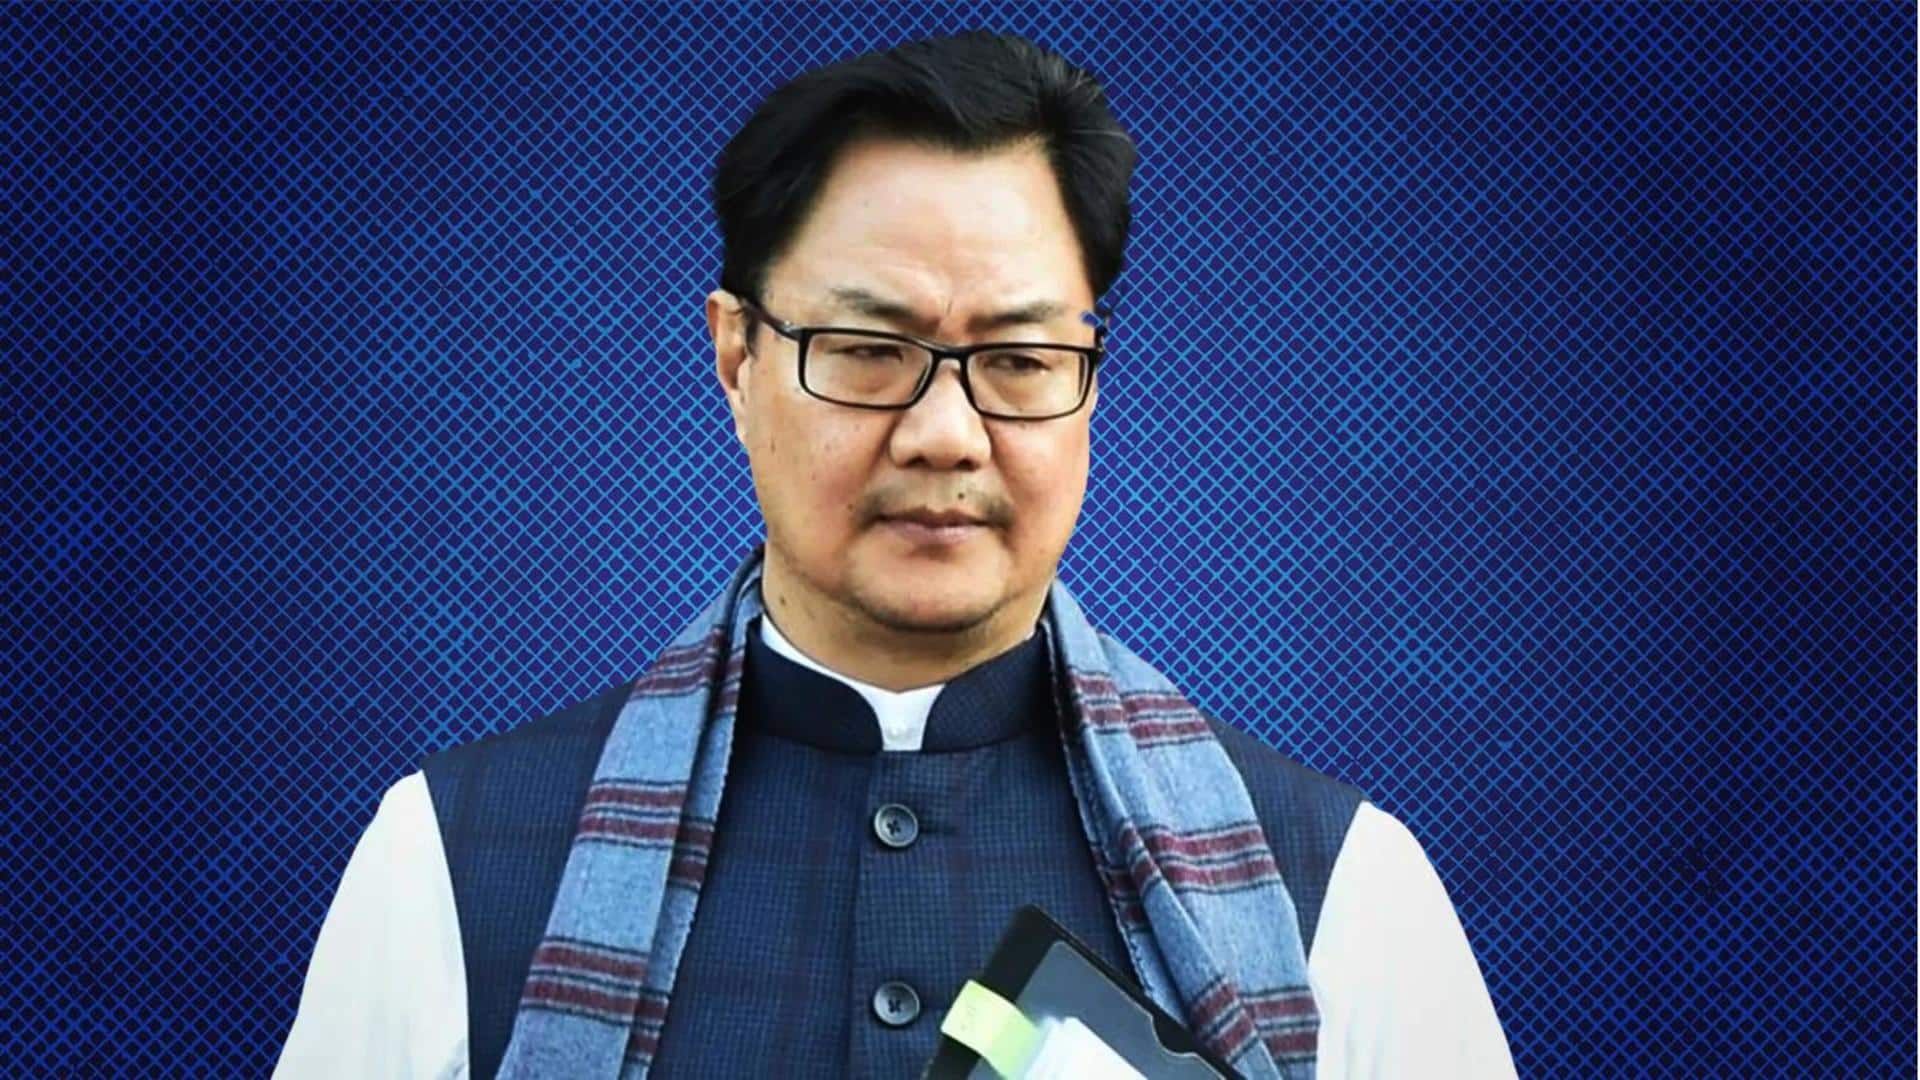 Attempts being made to indicate Indian democracy in crisis: Rijiju